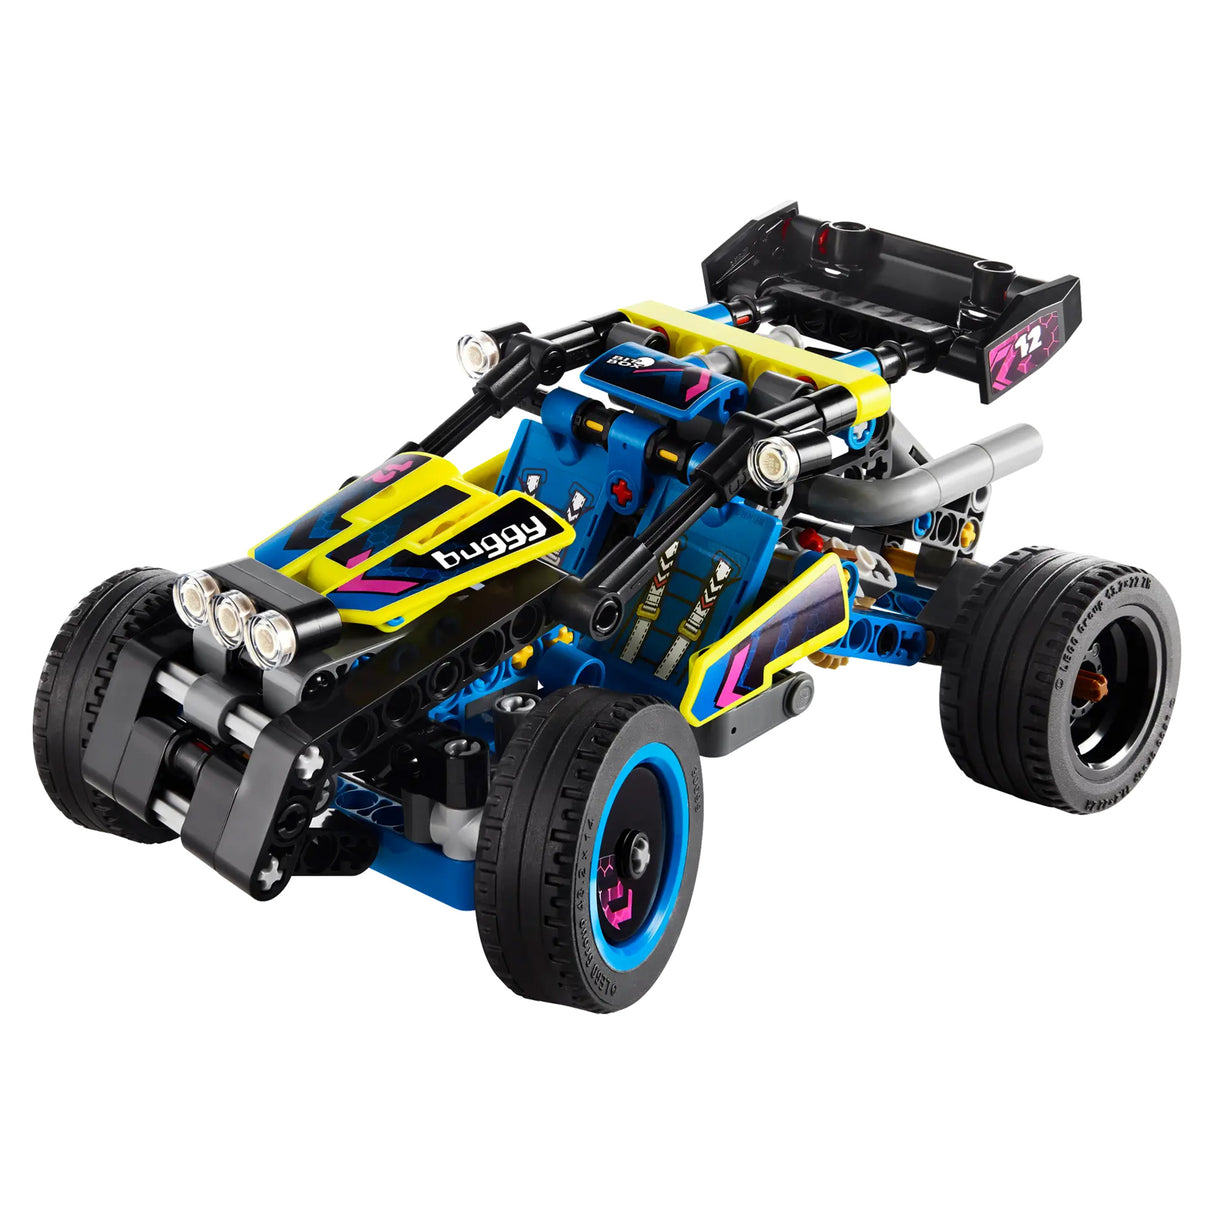 LEGO Technic Off-Road Race Buggy 42164, (219-pieces)